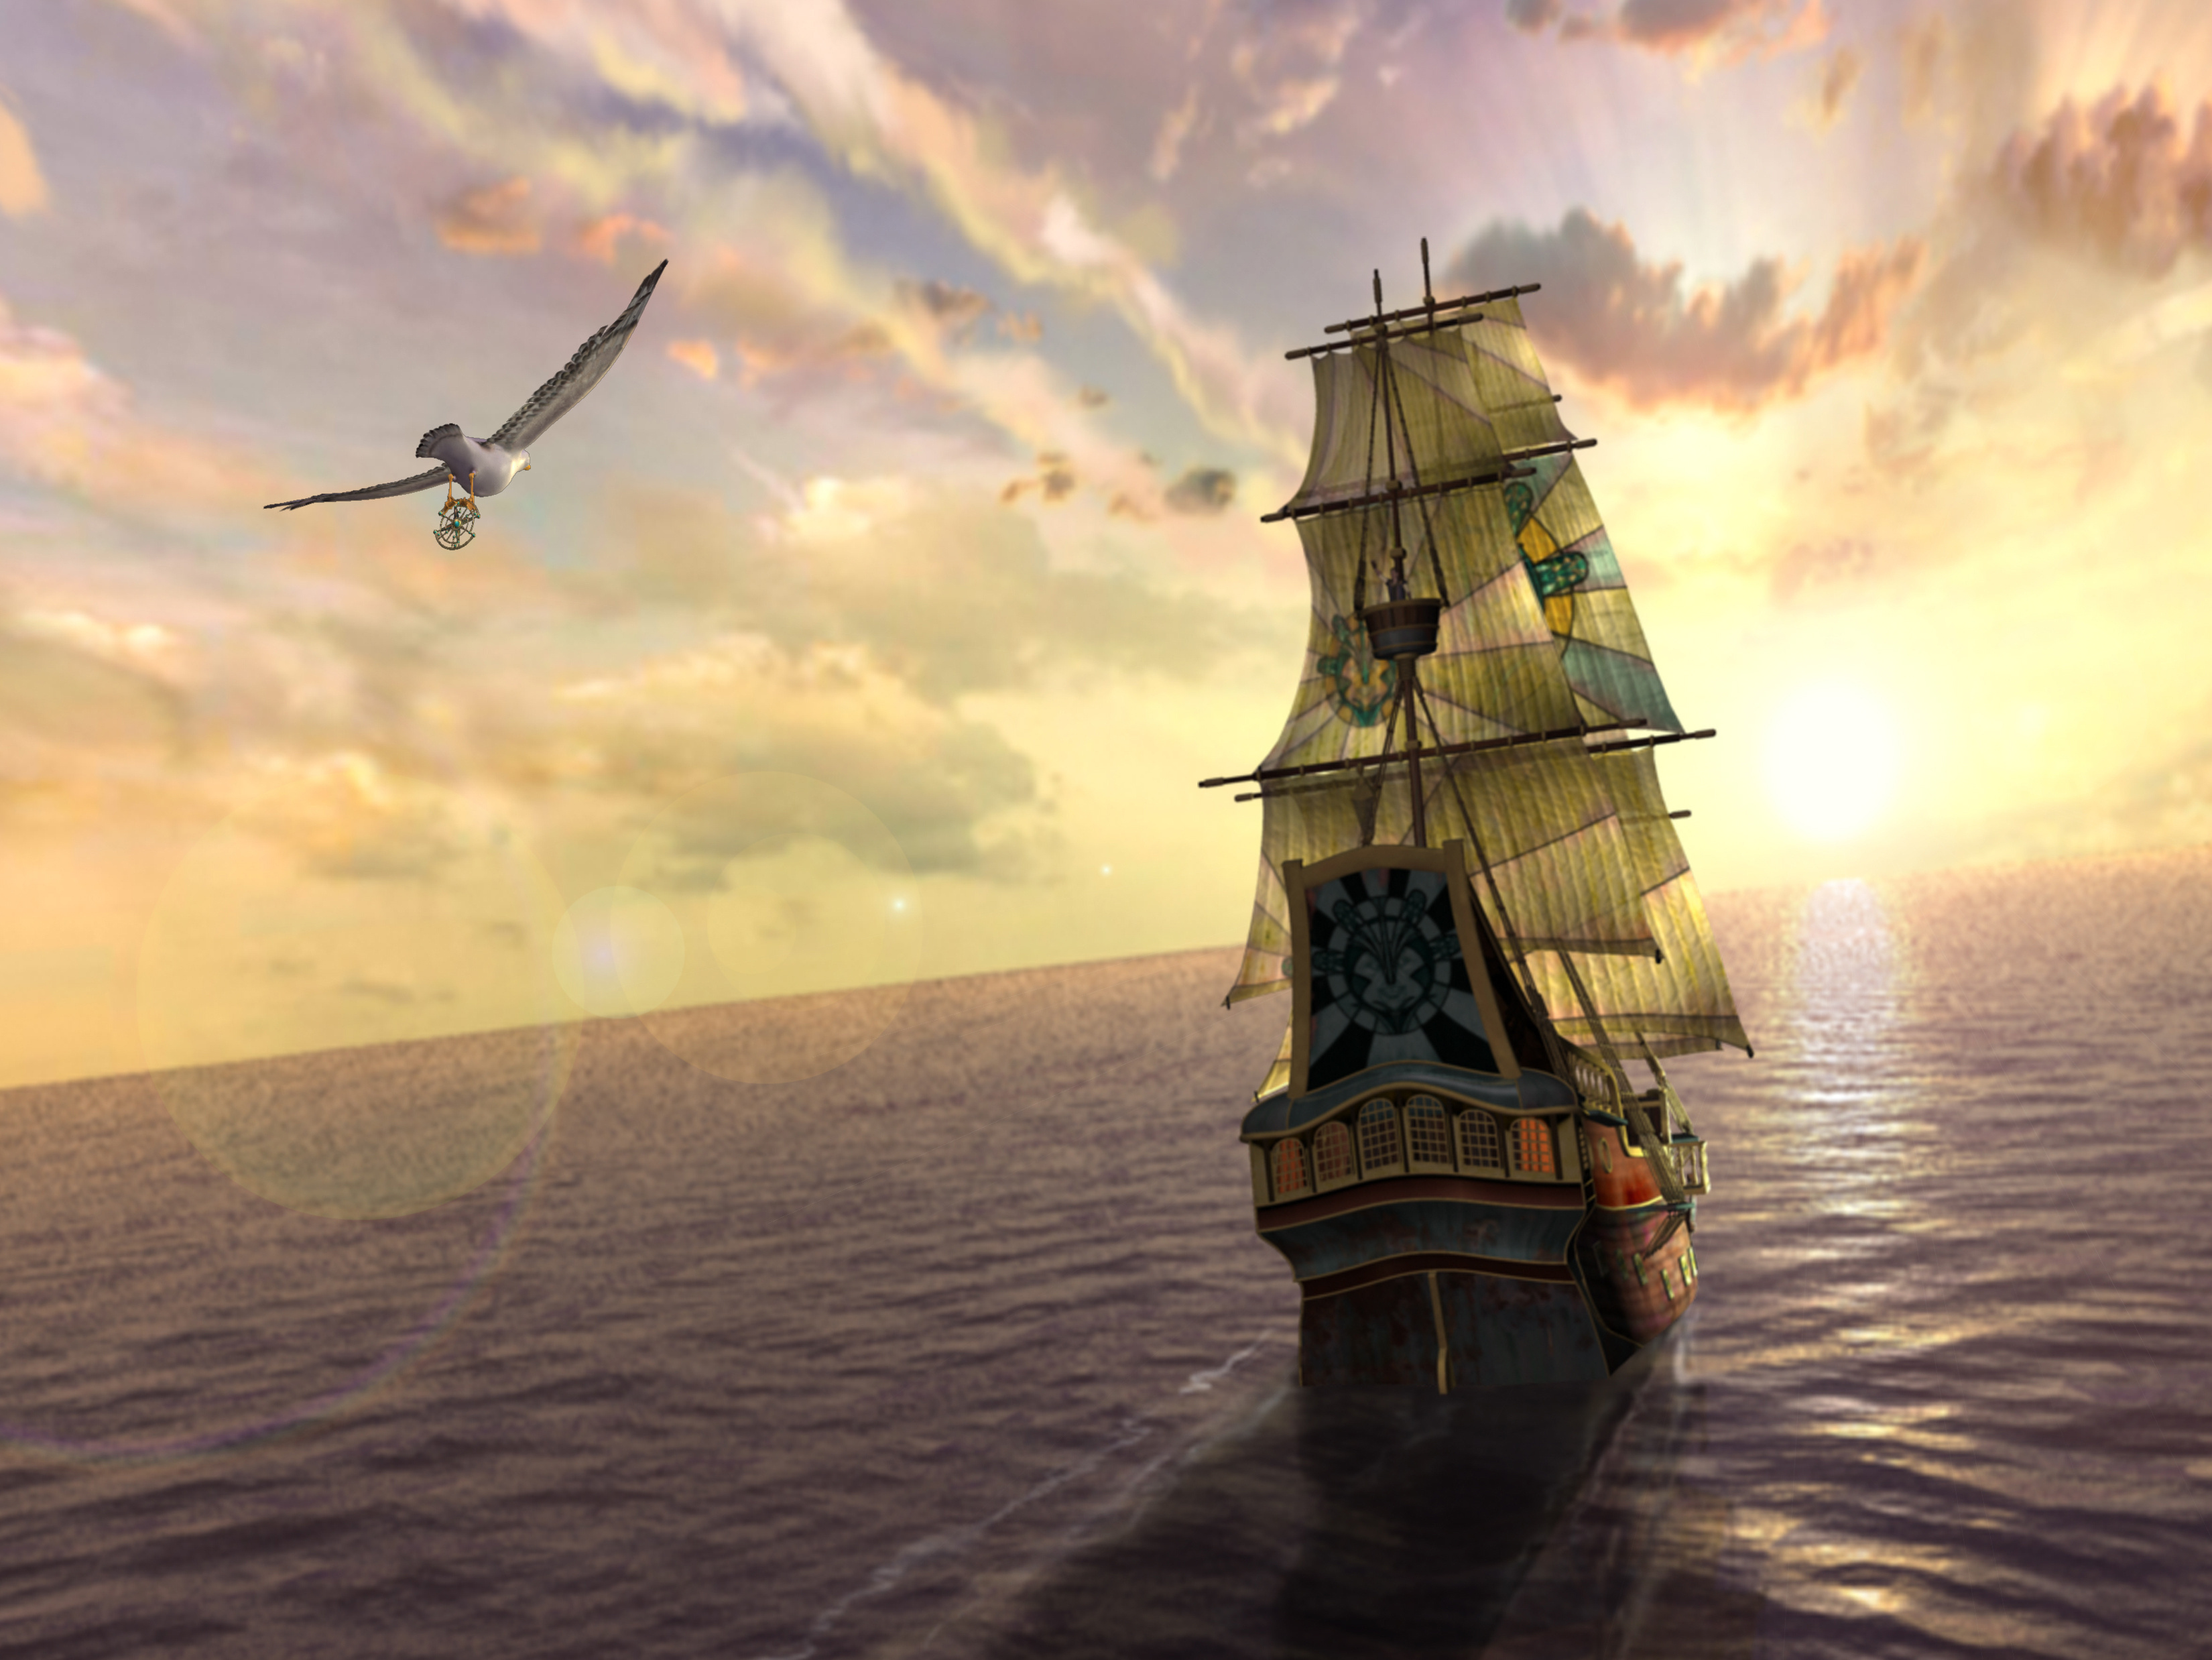 Ship Wallpaper Image In HD Available Here For